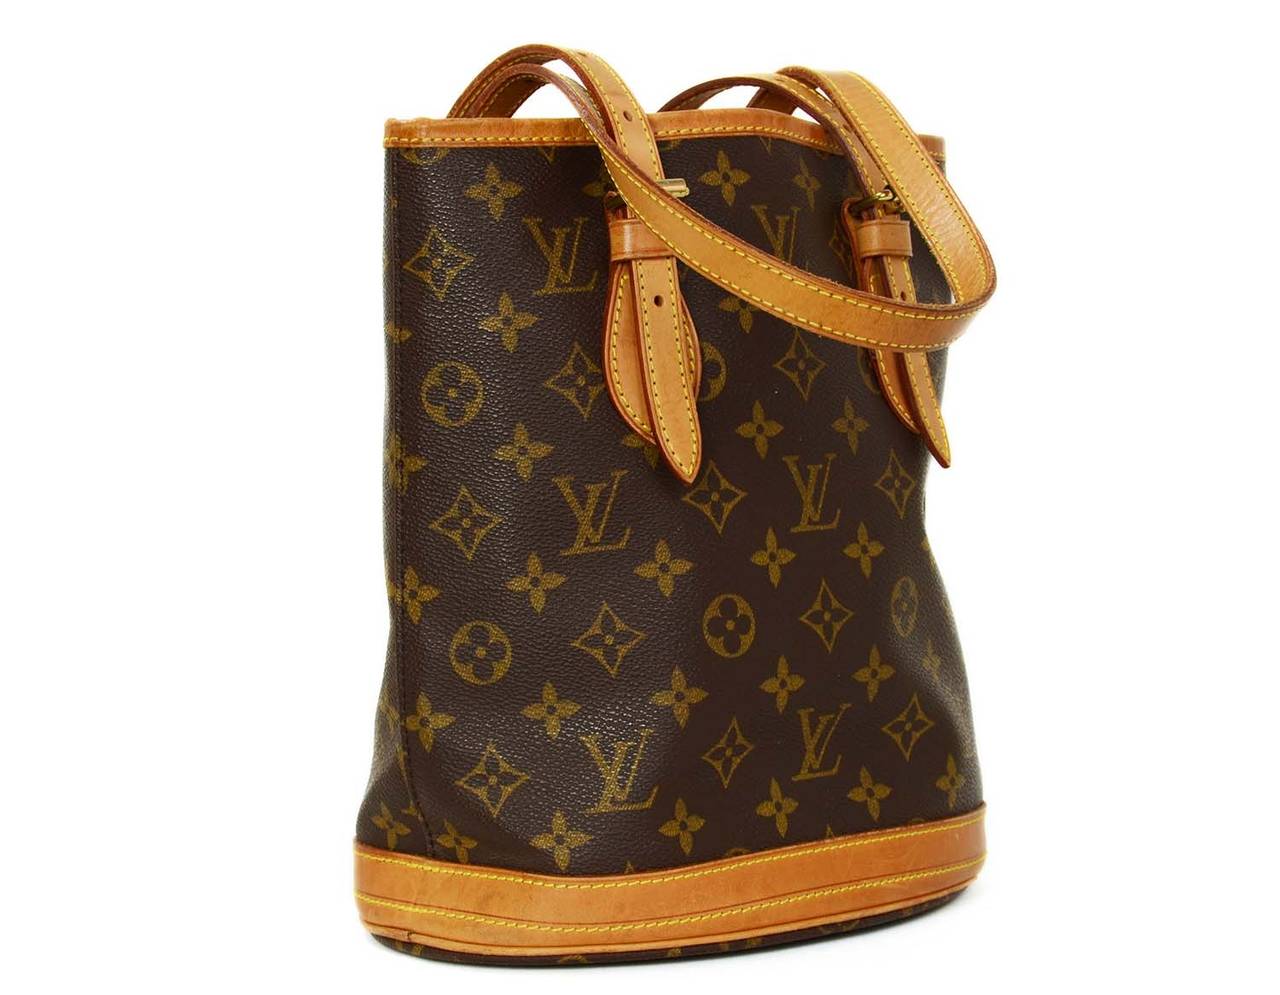 LOUIS VUITTON Monogram Bucket Bag PM

    Made in: France
    Year of Production: 1998
    Color: Classic Louis Vuitton monogram
    Materials: Coated canvas and leather lining
    Lining: Man made lining
    Serial Number: AR1918
   